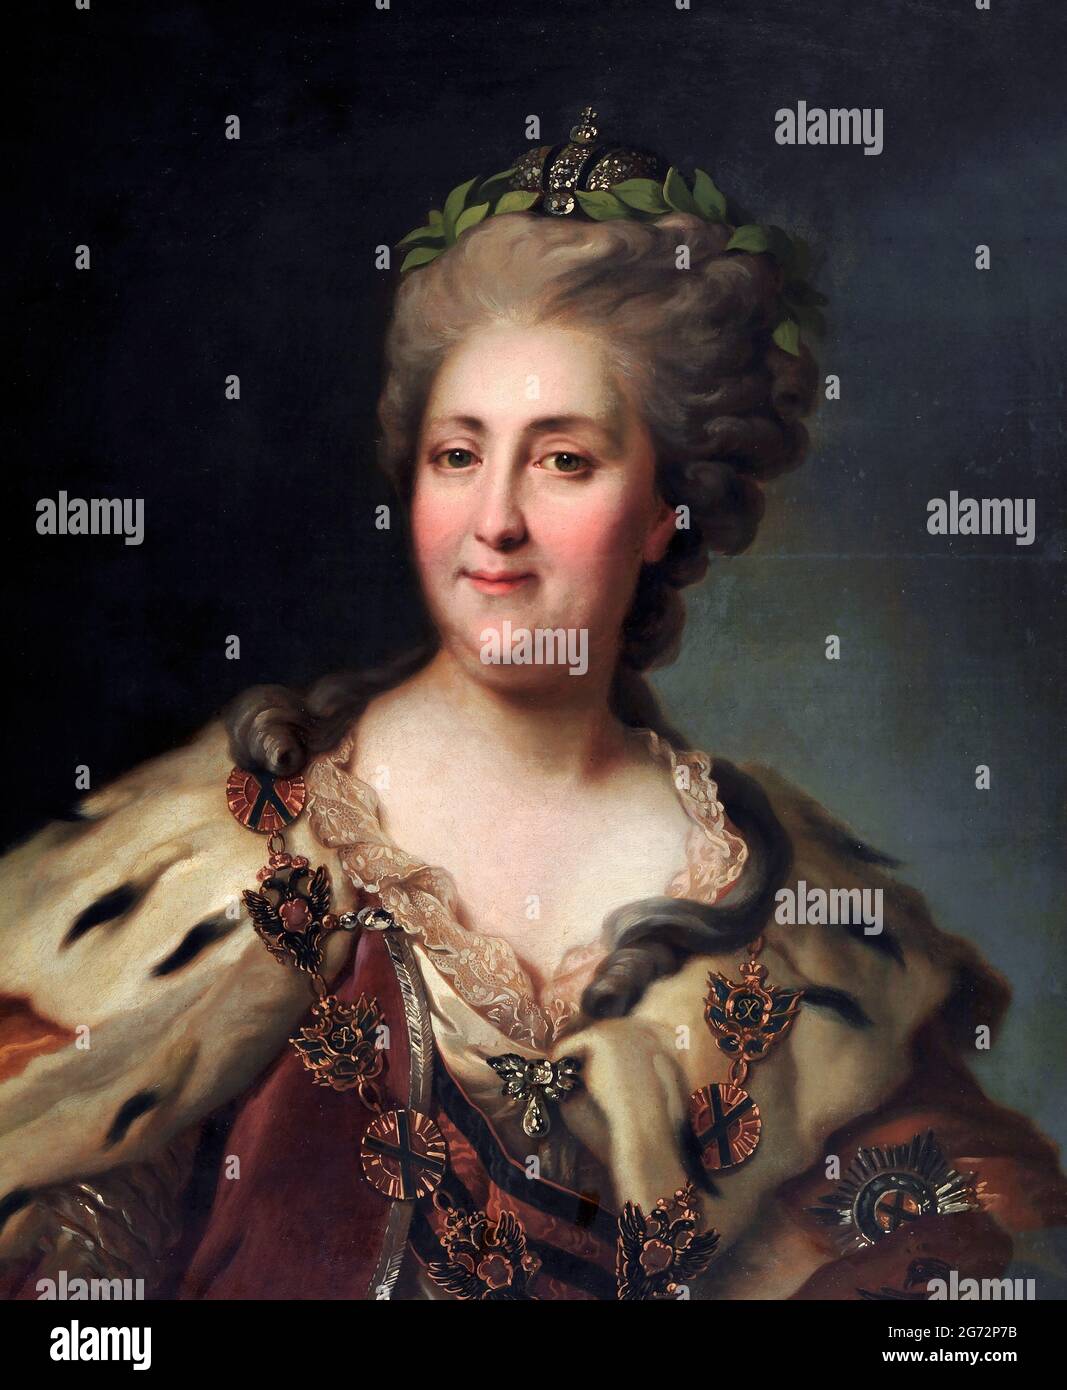 Catherine the Great. Portrait of Catherine II of Russia (1729-1796) by Fedor Rokotoff, oil on canvas, 18th century Stock Photo